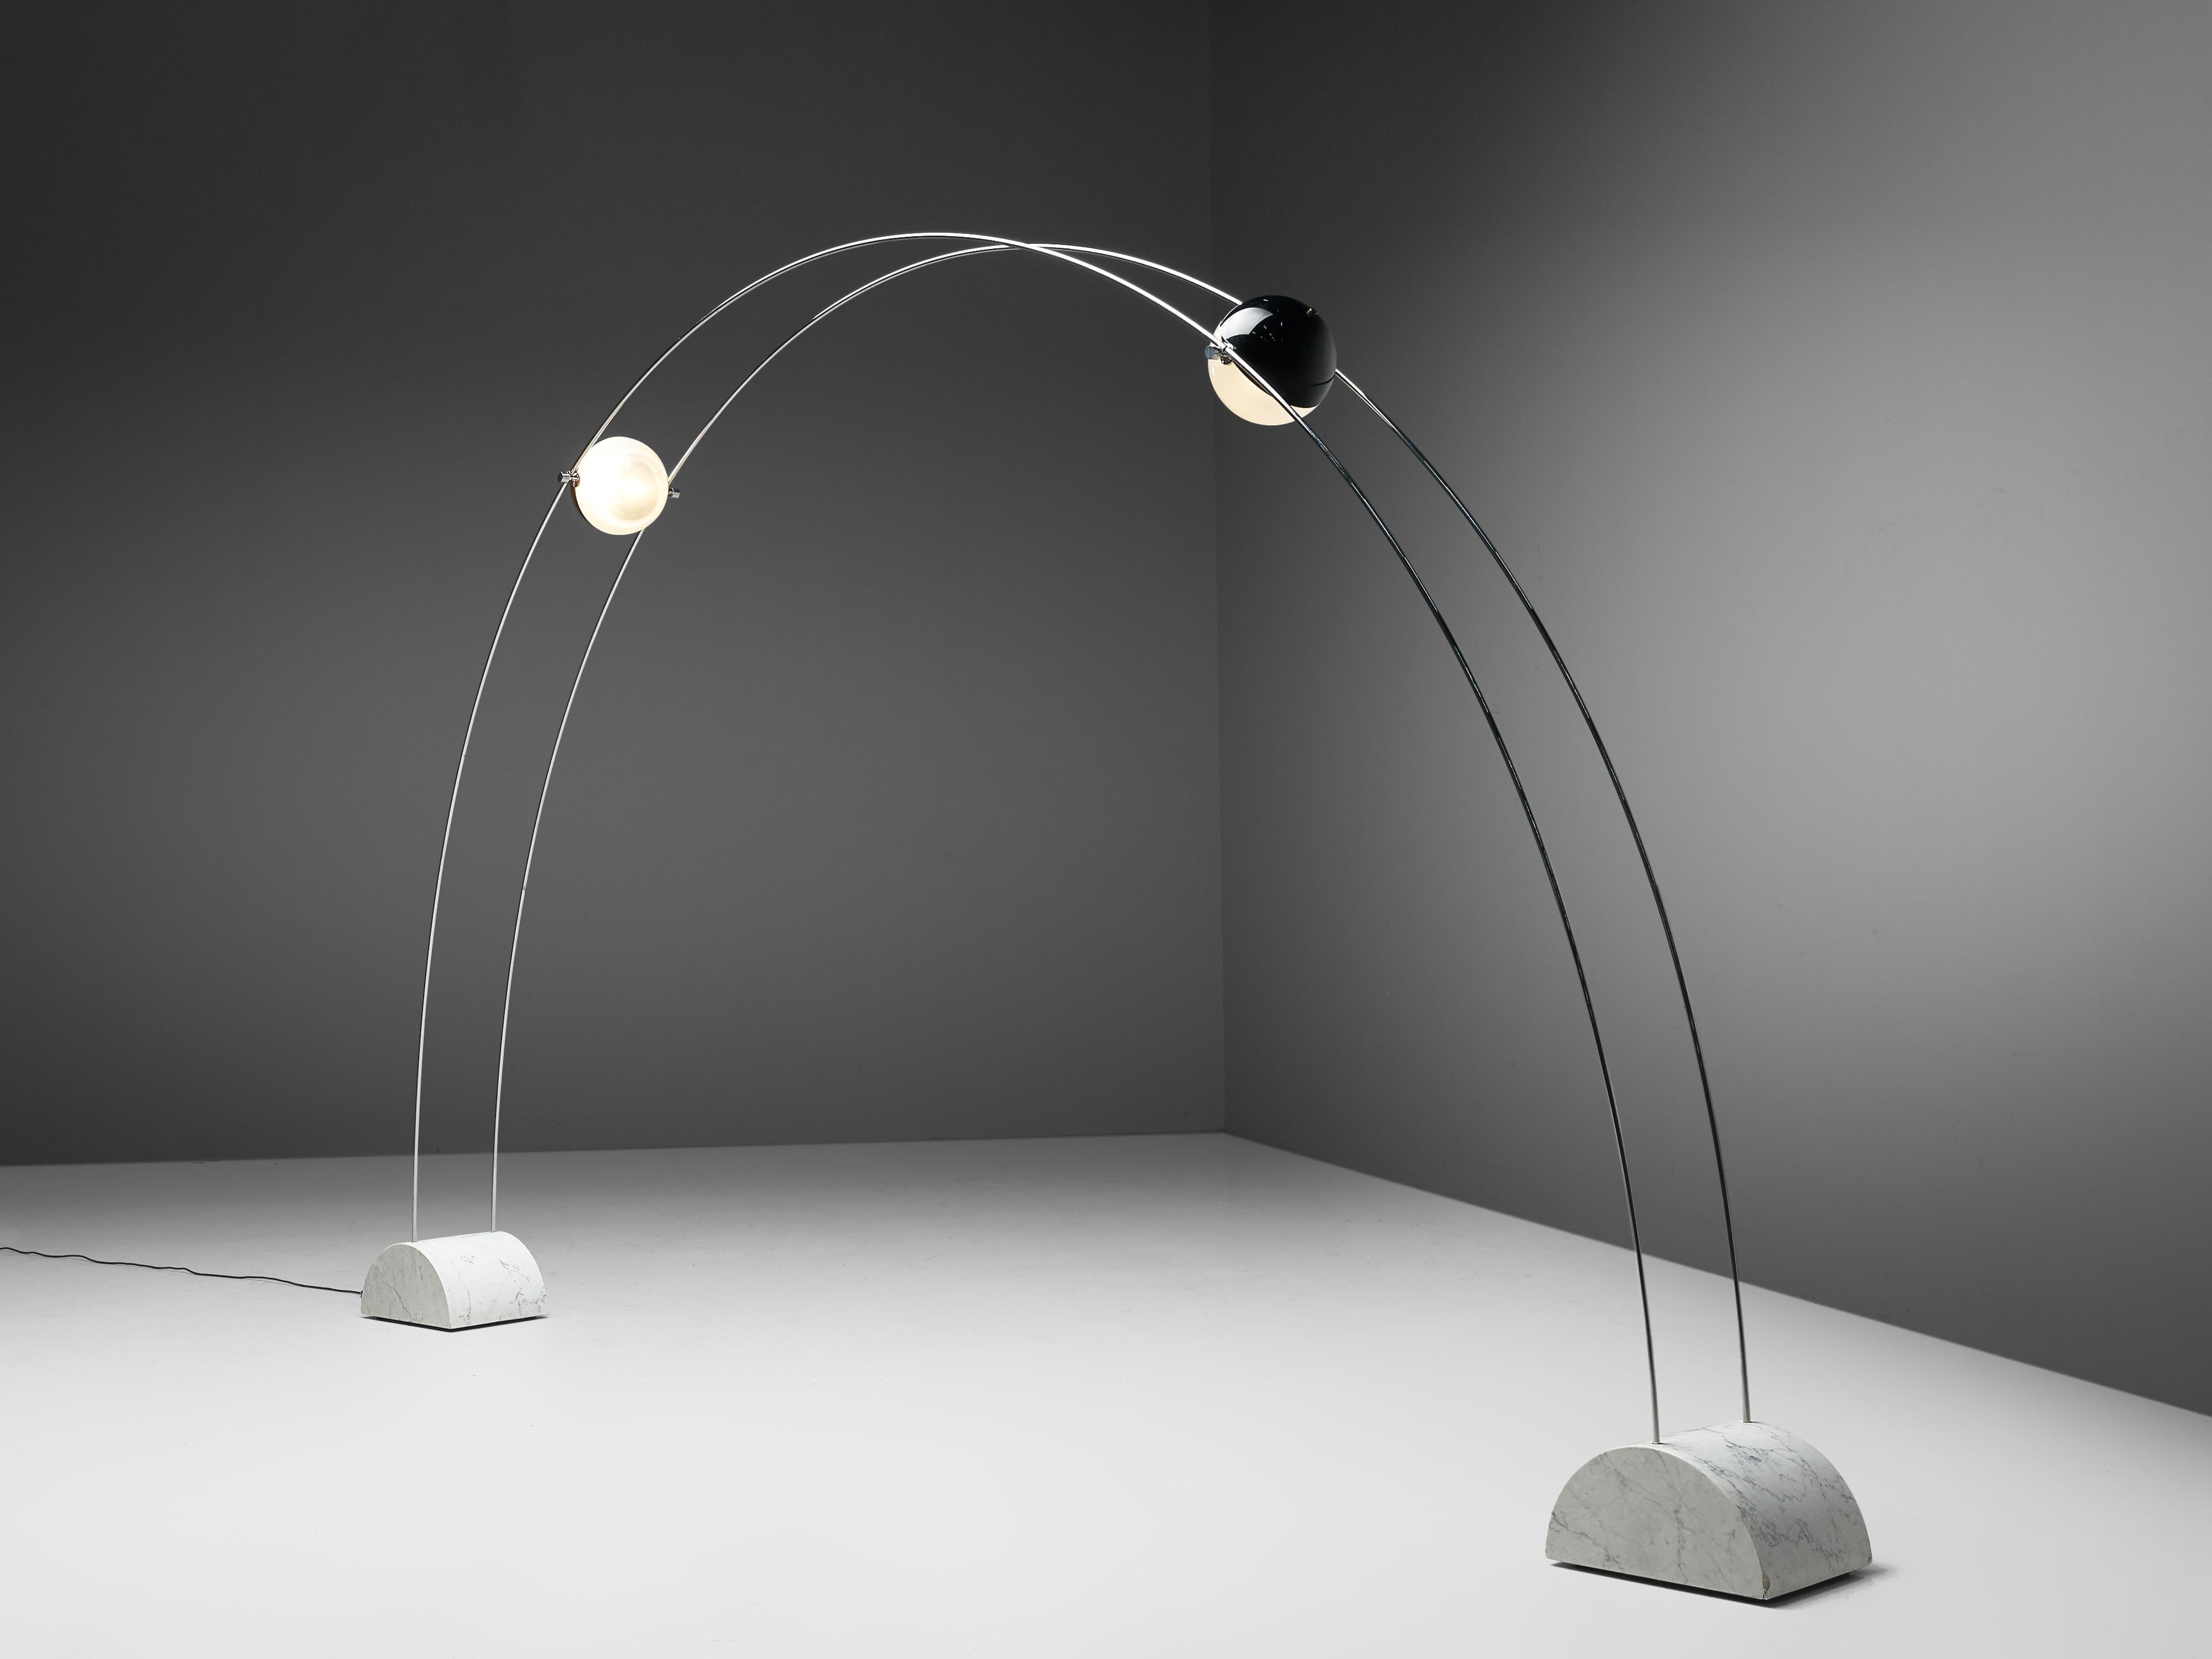 Studio A.R.D.I.T.I. for Sormani, floor lamp model 'Ponte', marble, metal, acrylic, Italy, 1970s

Lighting sculpture by Studio A.R.D.I.T.I. for Sormani. This wonderful artistic floor lamp spans an arch in your room. From two bases in marble two